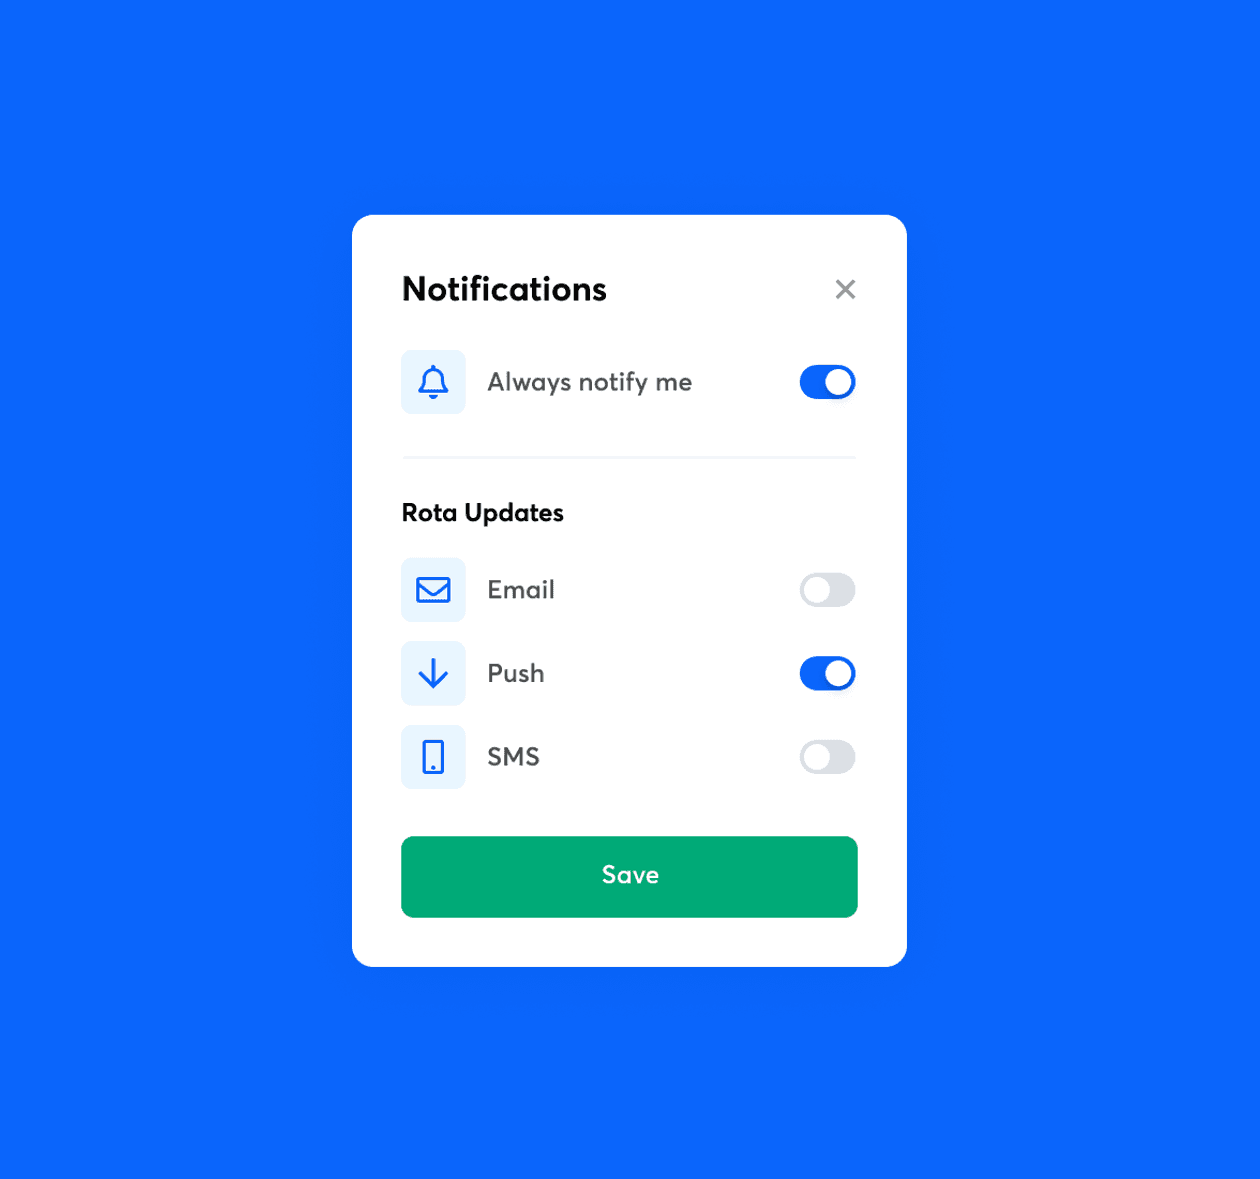 Notifications settings in RotaCloud, including an Always notify me slider, and options for how to receive updates - via email, push, and or SMS.